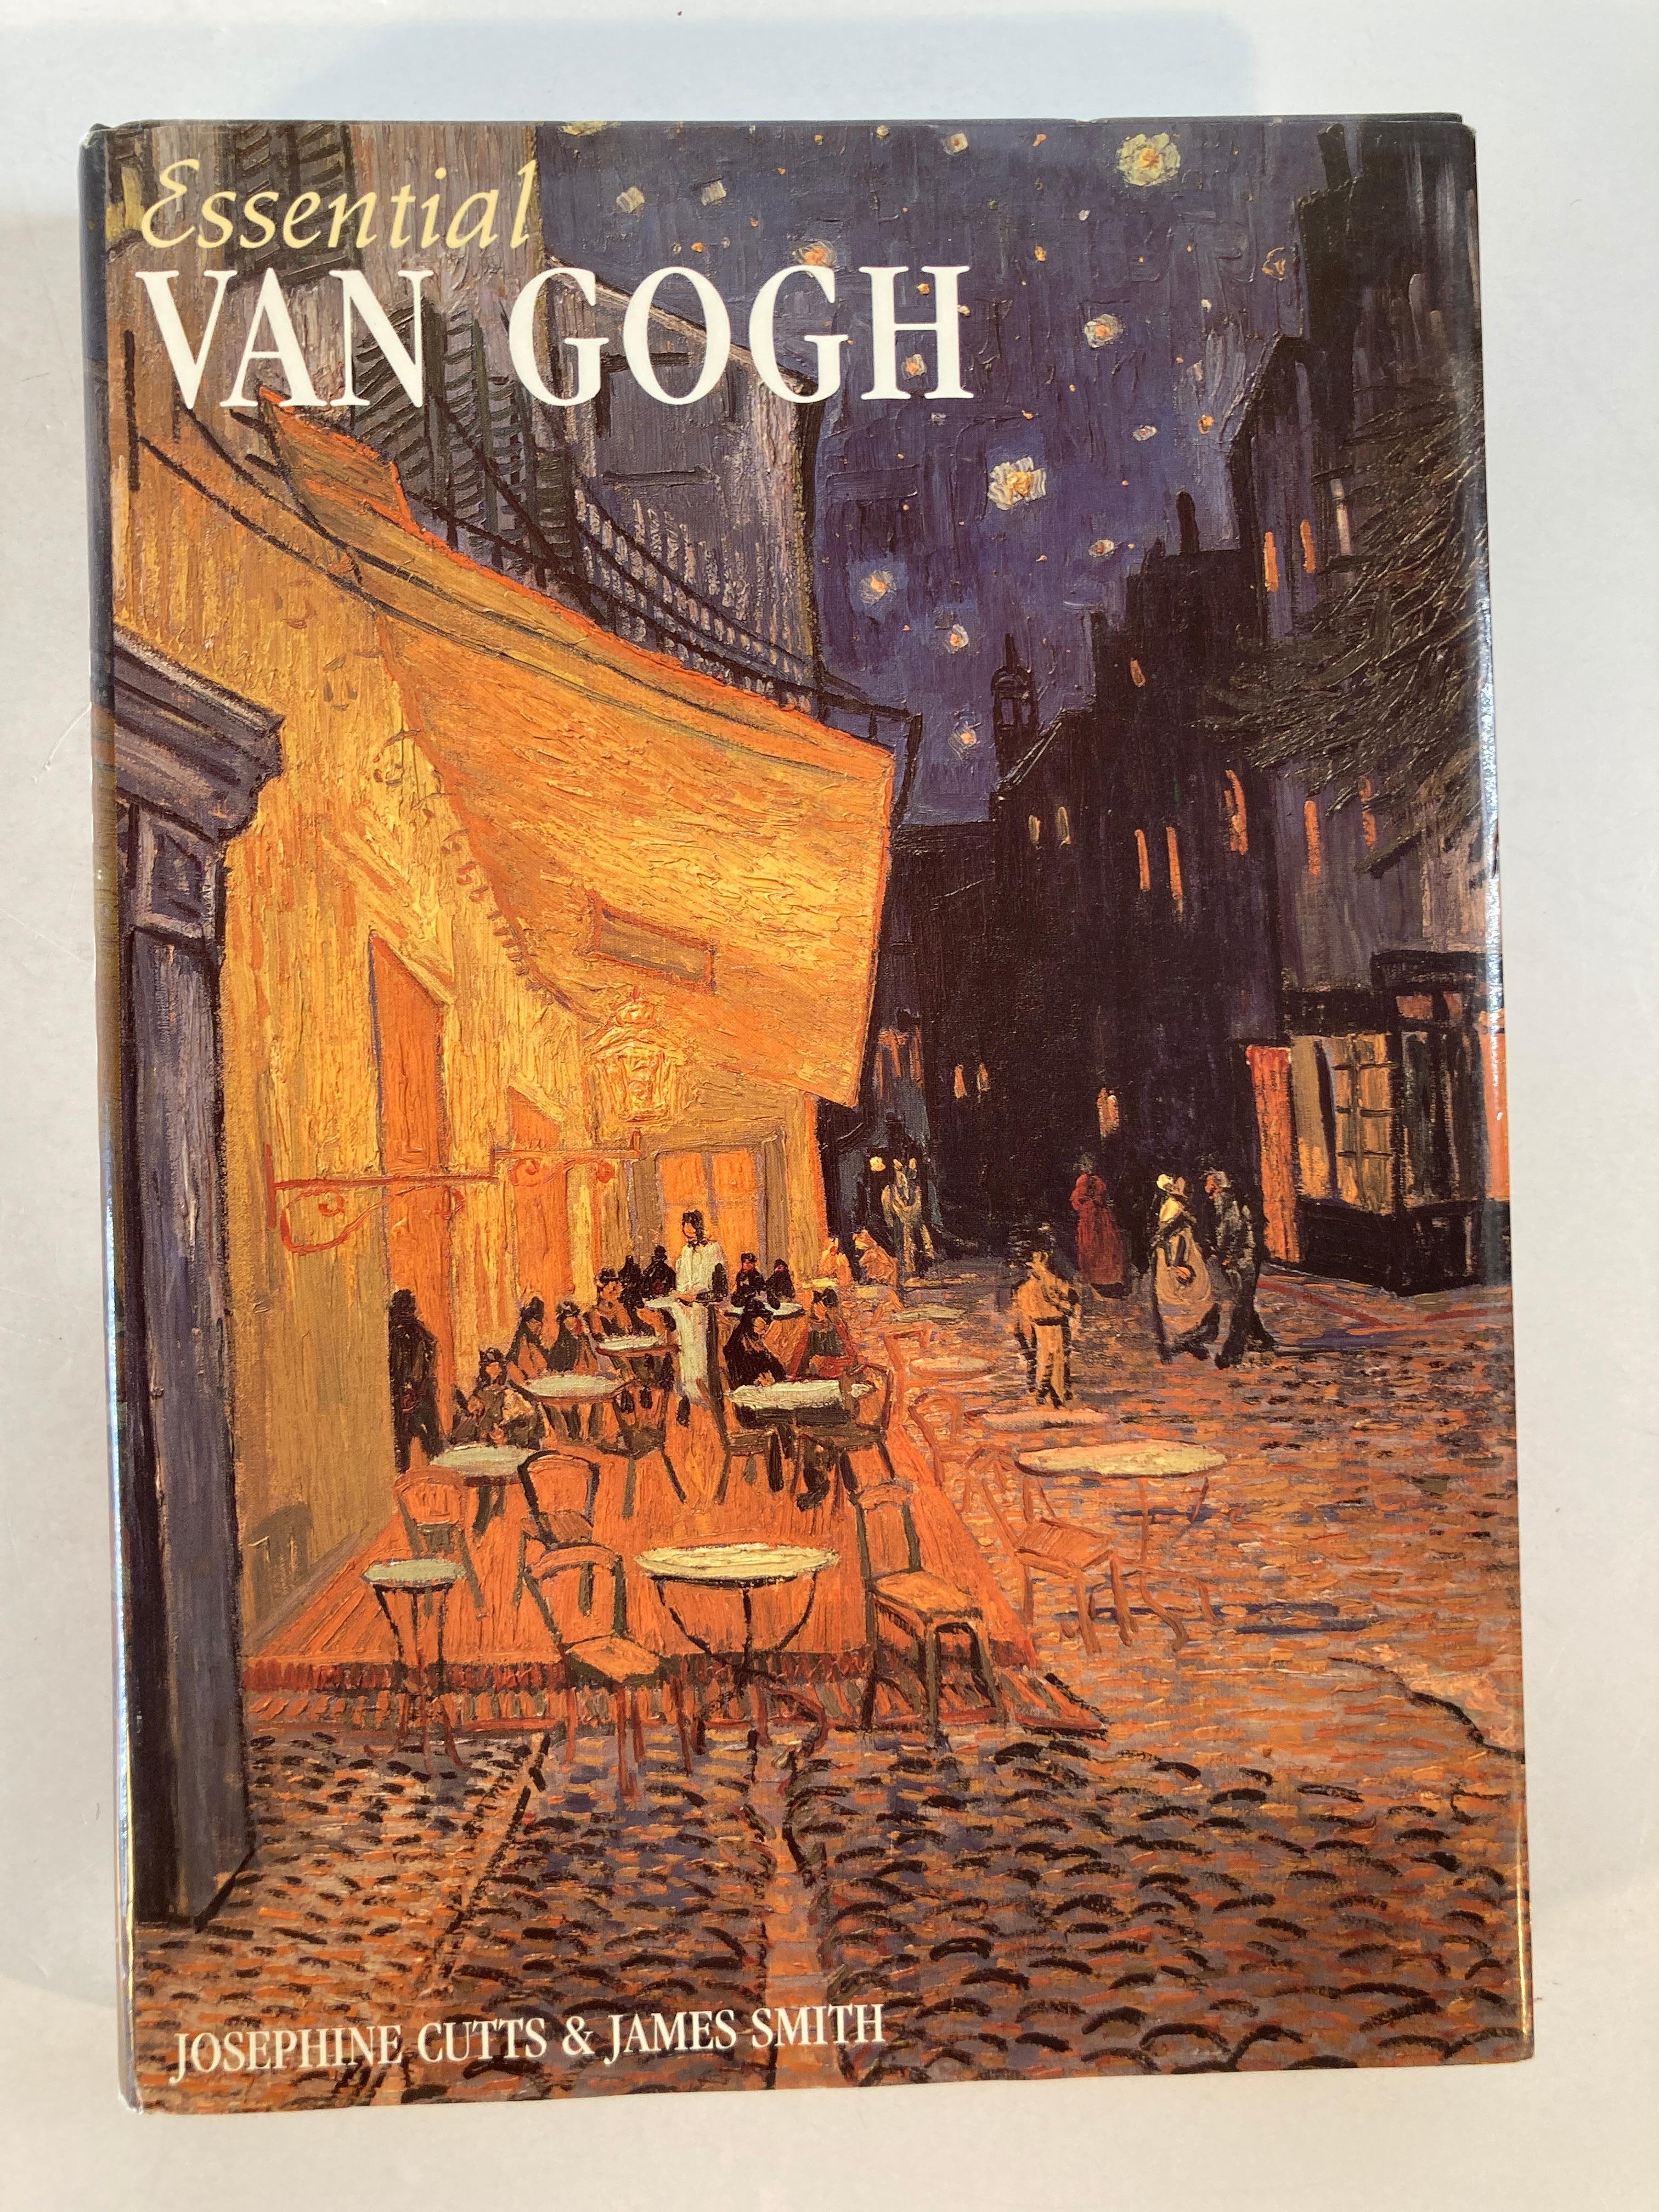 Essential Van Gogh coffee table book.
the works of Vincent van Gogh (1853–1890) are among the most well known and celebrated in the world. In paintings such as Sunflowers, The Starry Night, and Self-Portrait with Bandaged Ear, we recognize an